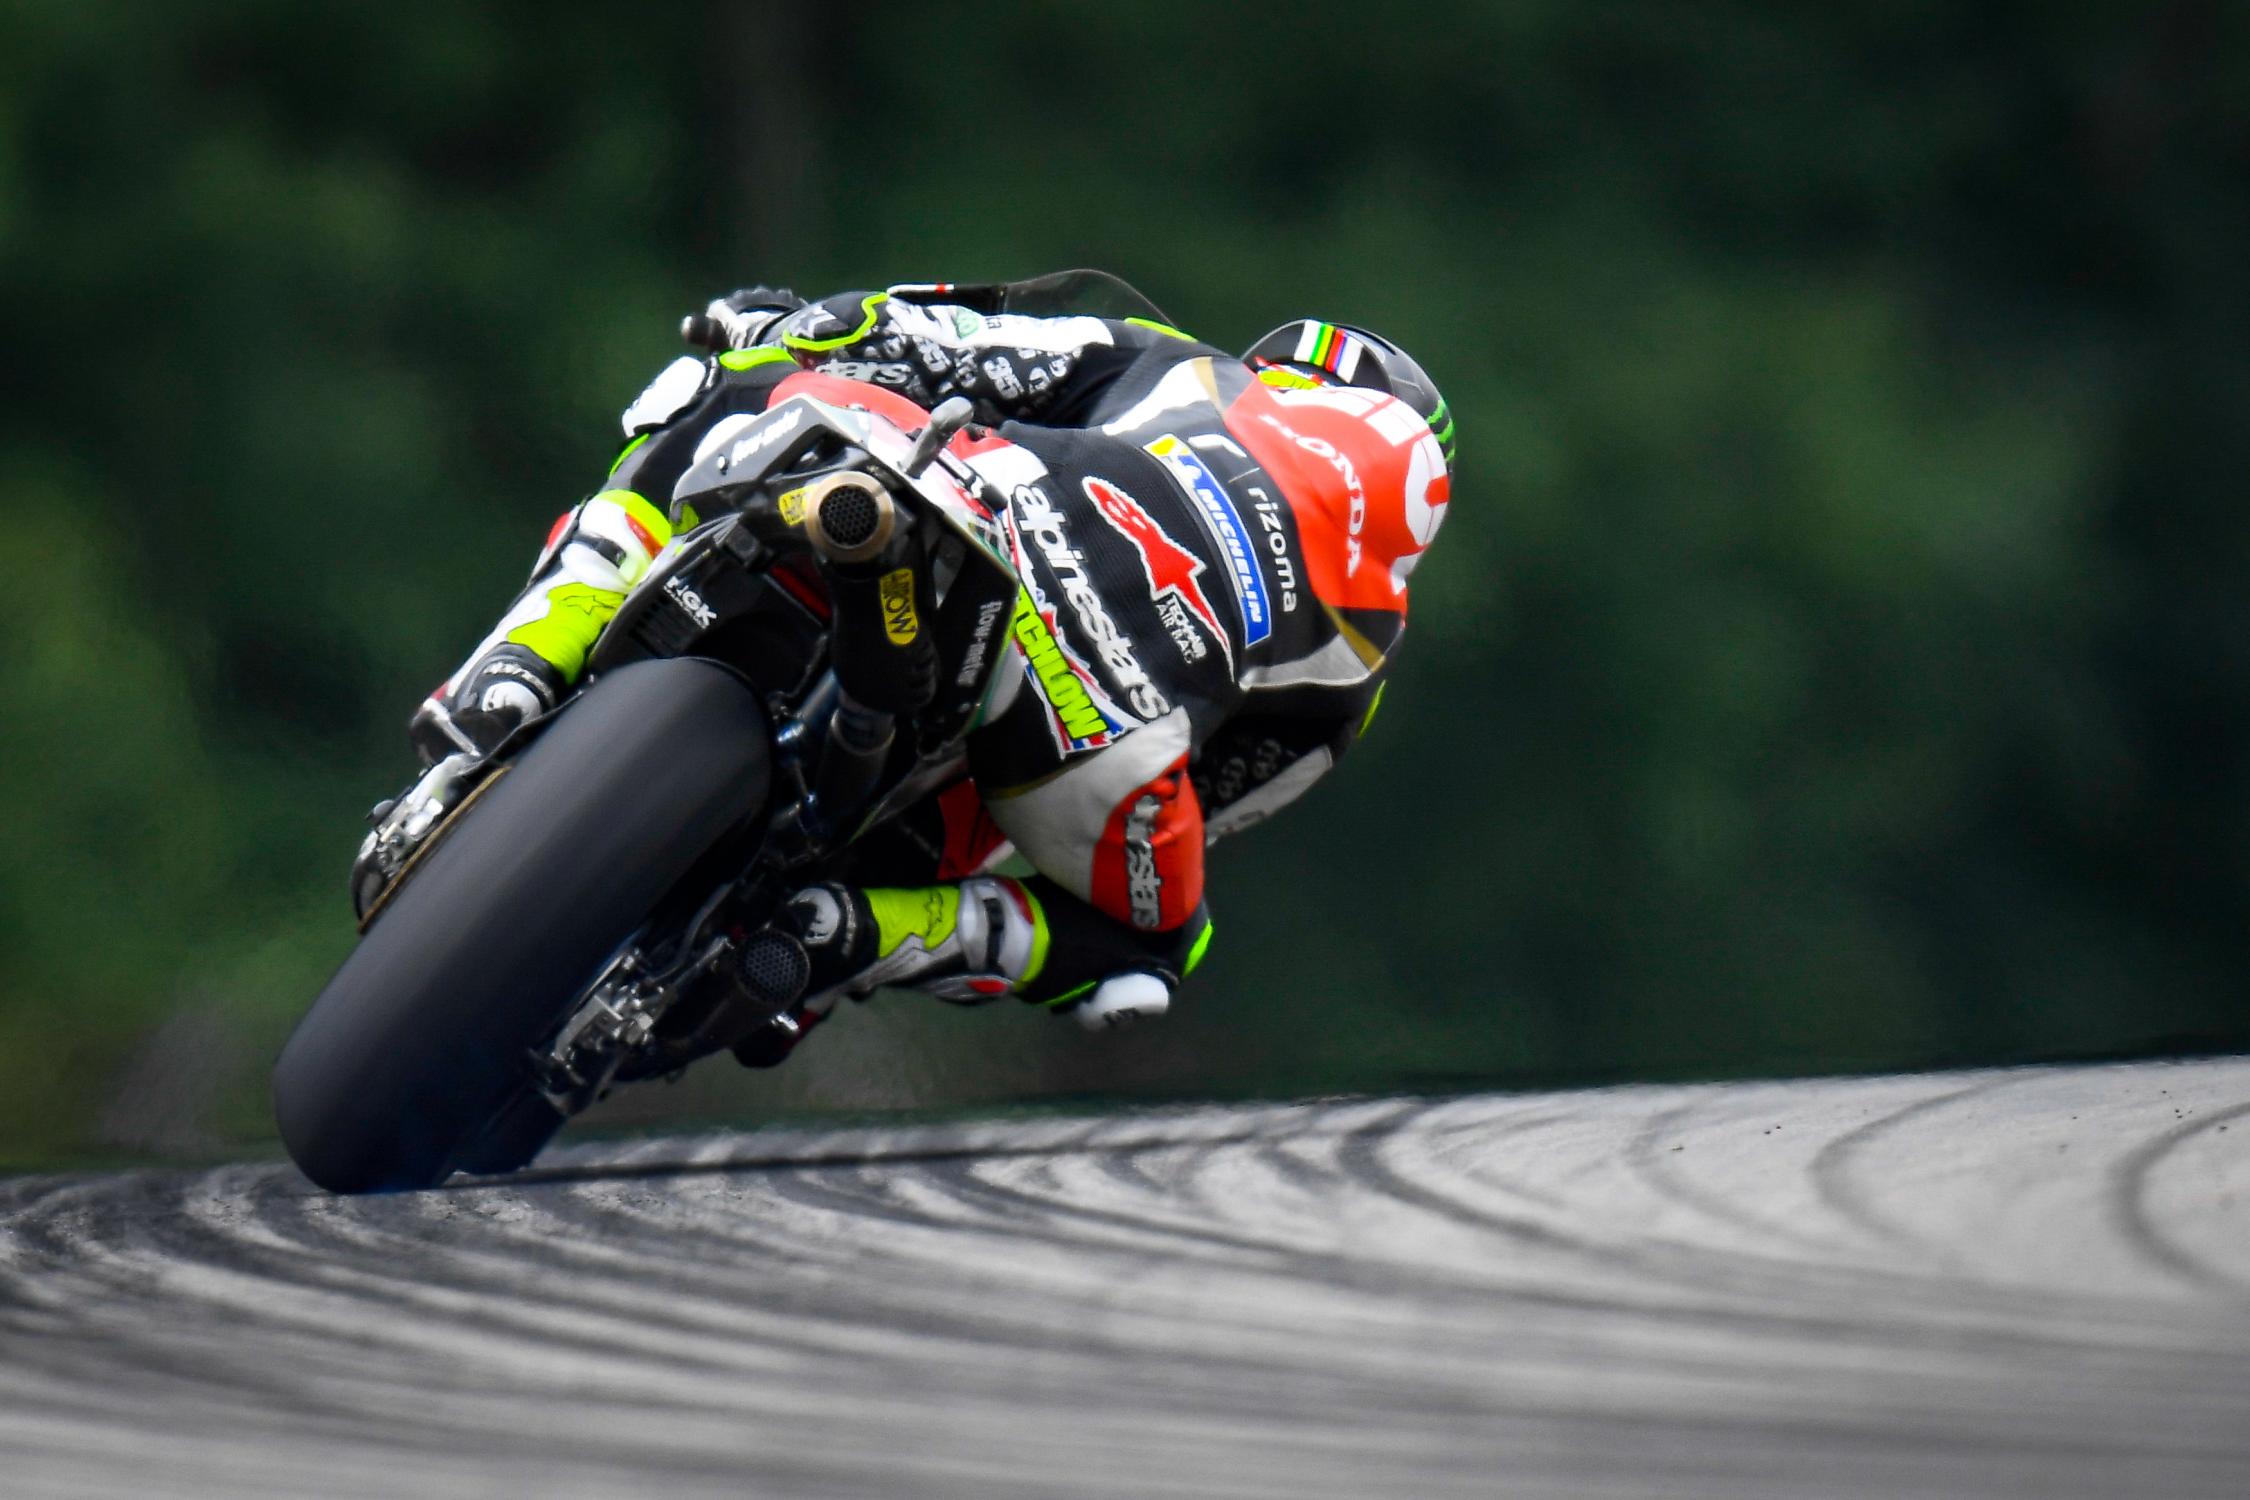 Crutchlow starts well at Sachsenring